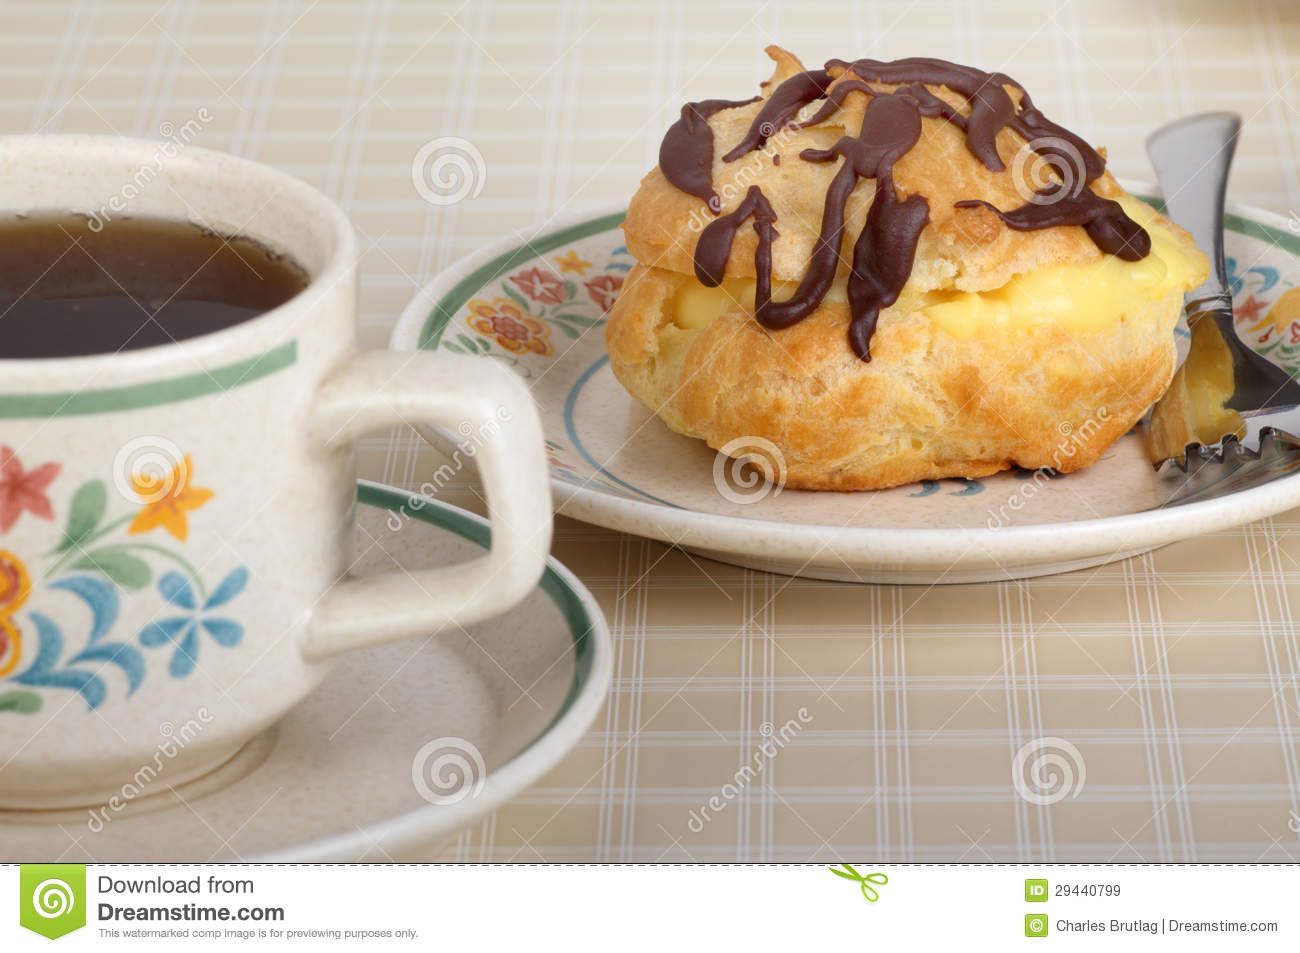 Cream Puff Royalty Free Stock Images   Image  29440799